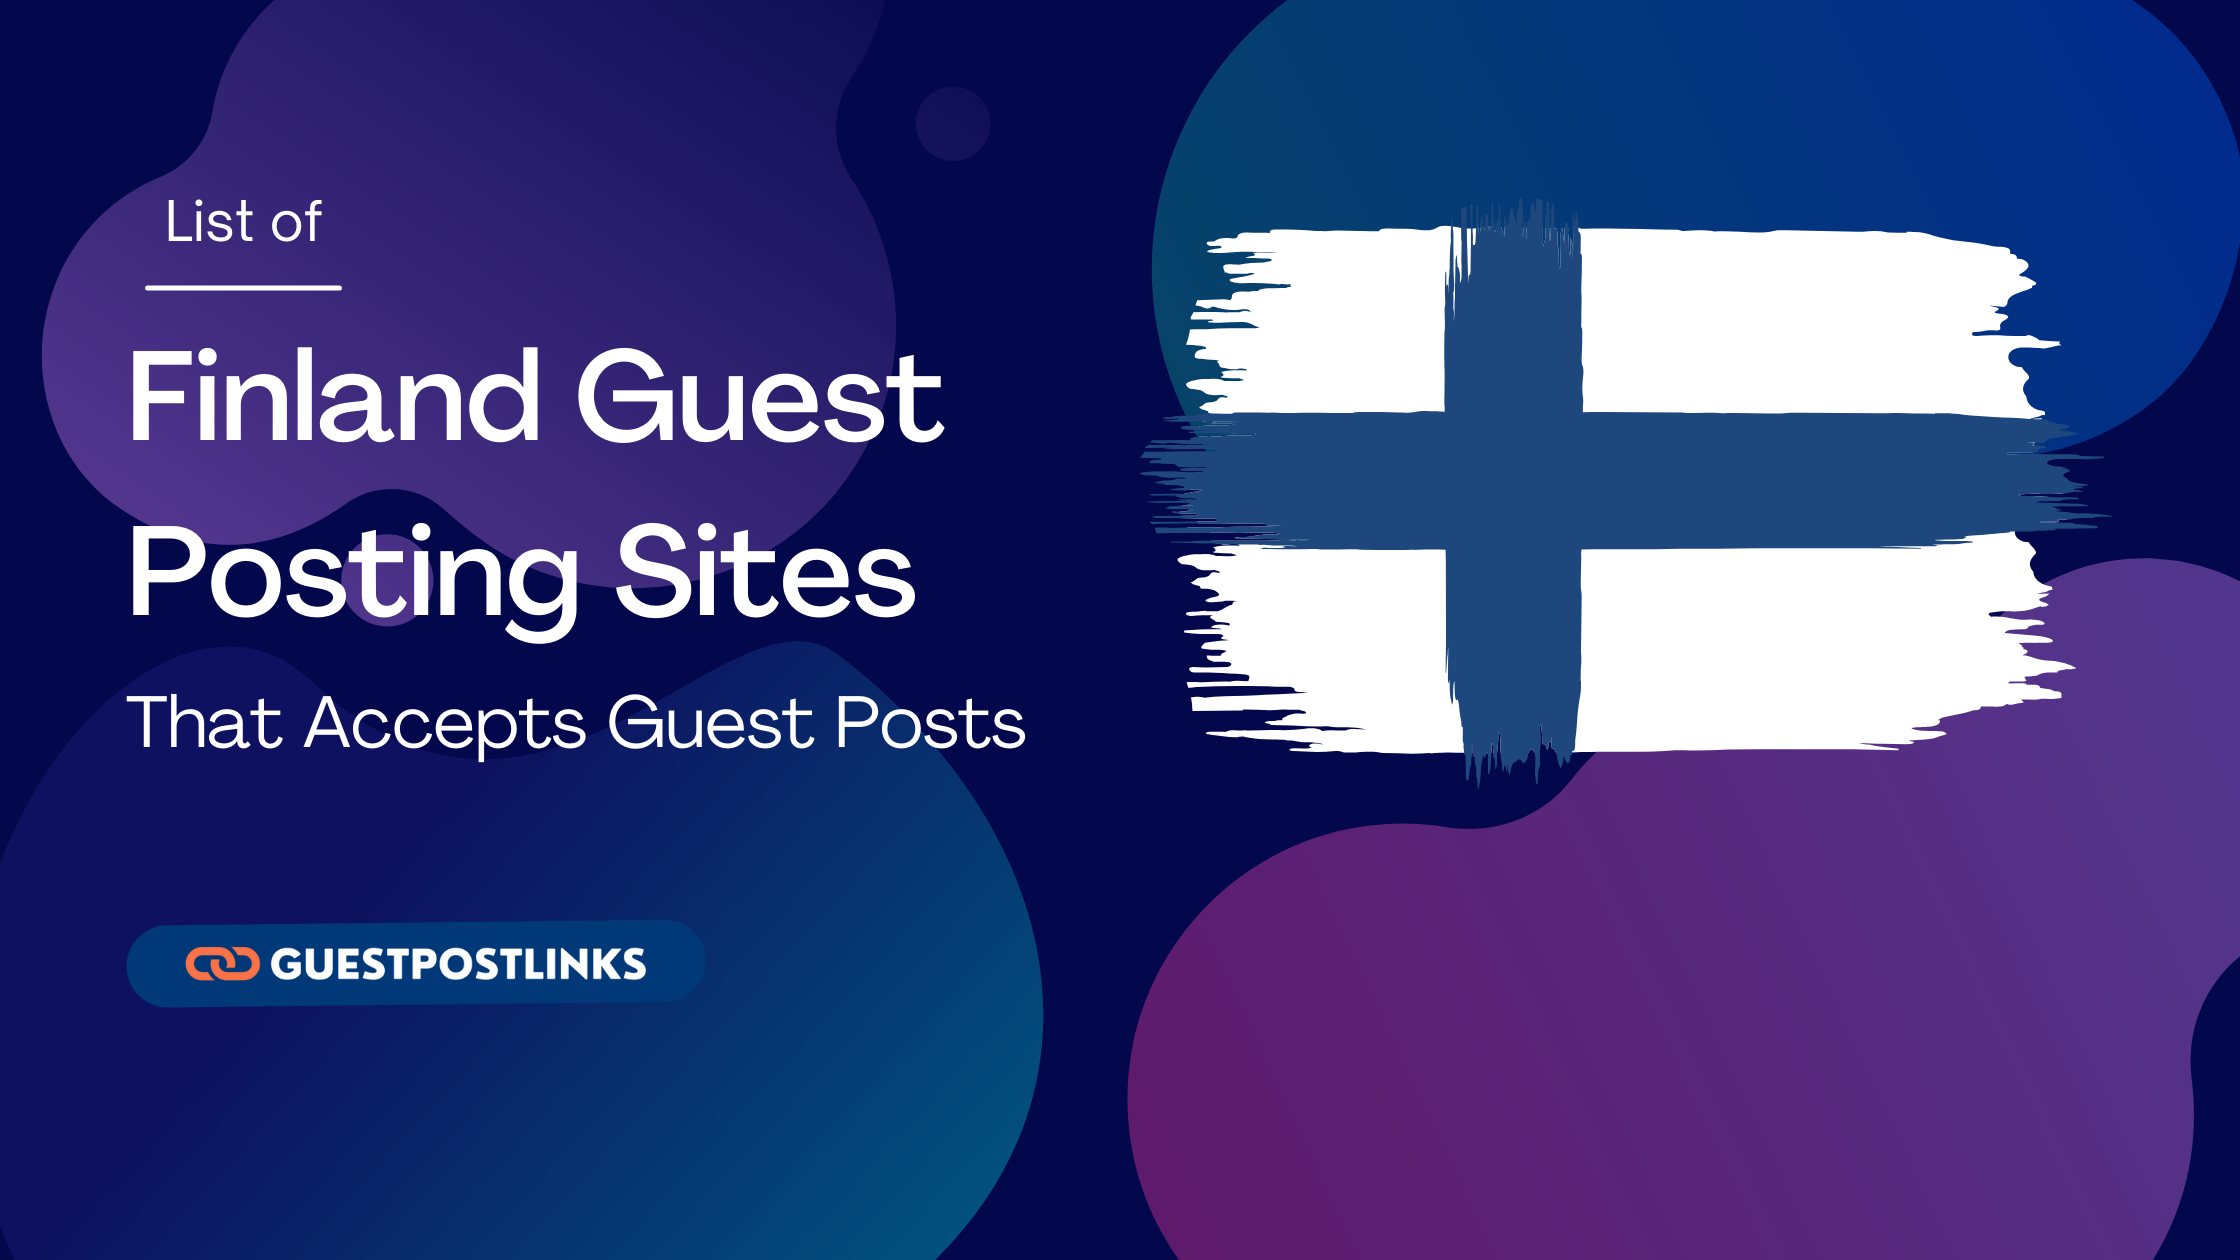 Finland Guest Posting Sites List